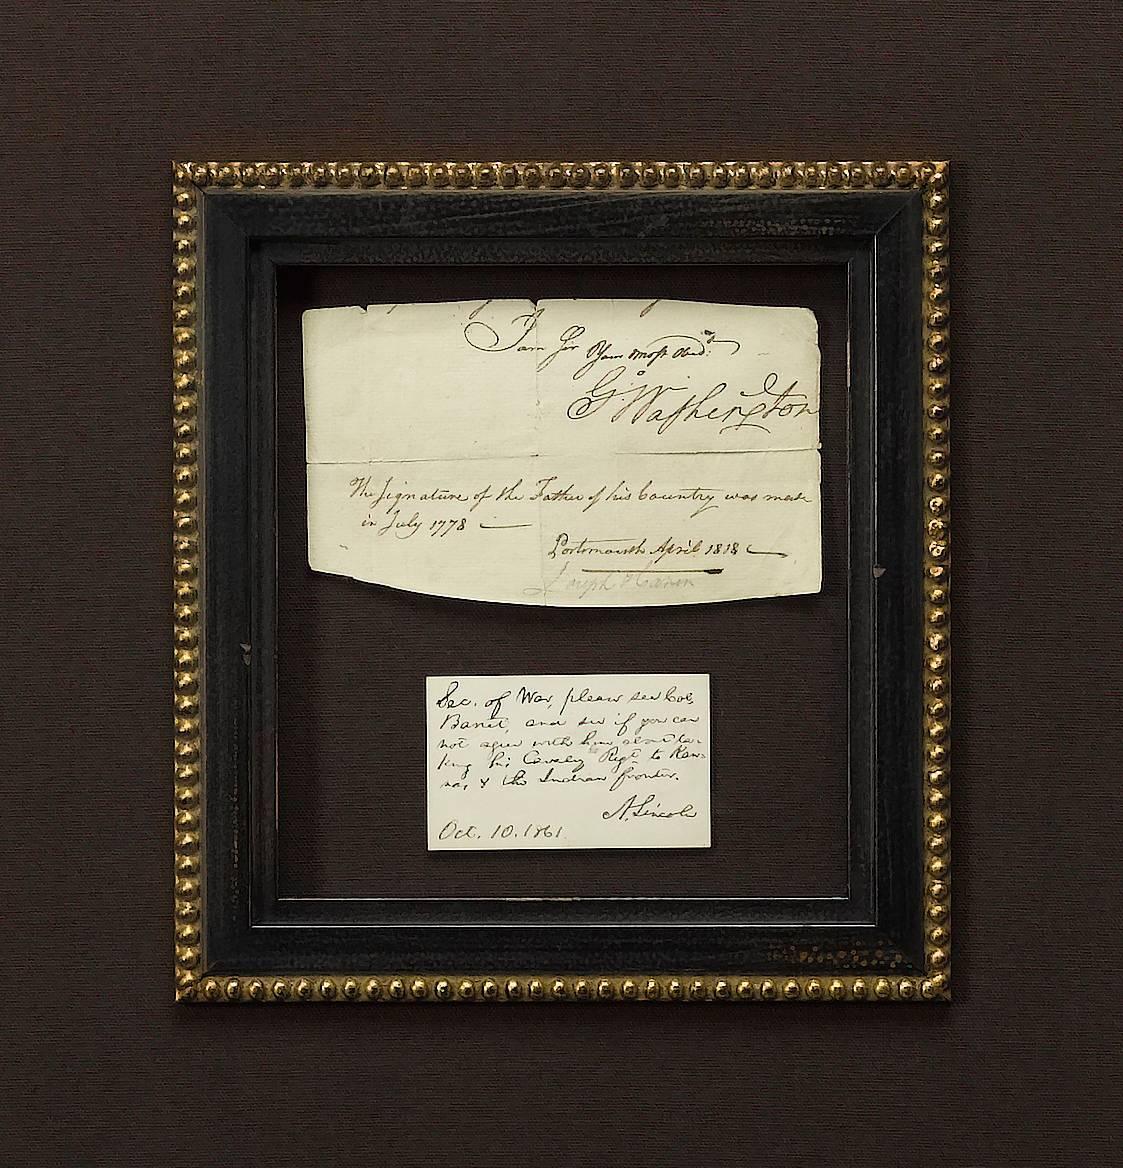 This exquisite autographed collage celebrates two of our country’s greatest leaders and political minds, George Washington and Abraham Lincoln. The collage is composed of two war-dated signatures: a 1778 conclusion of a manuscript letter signed by